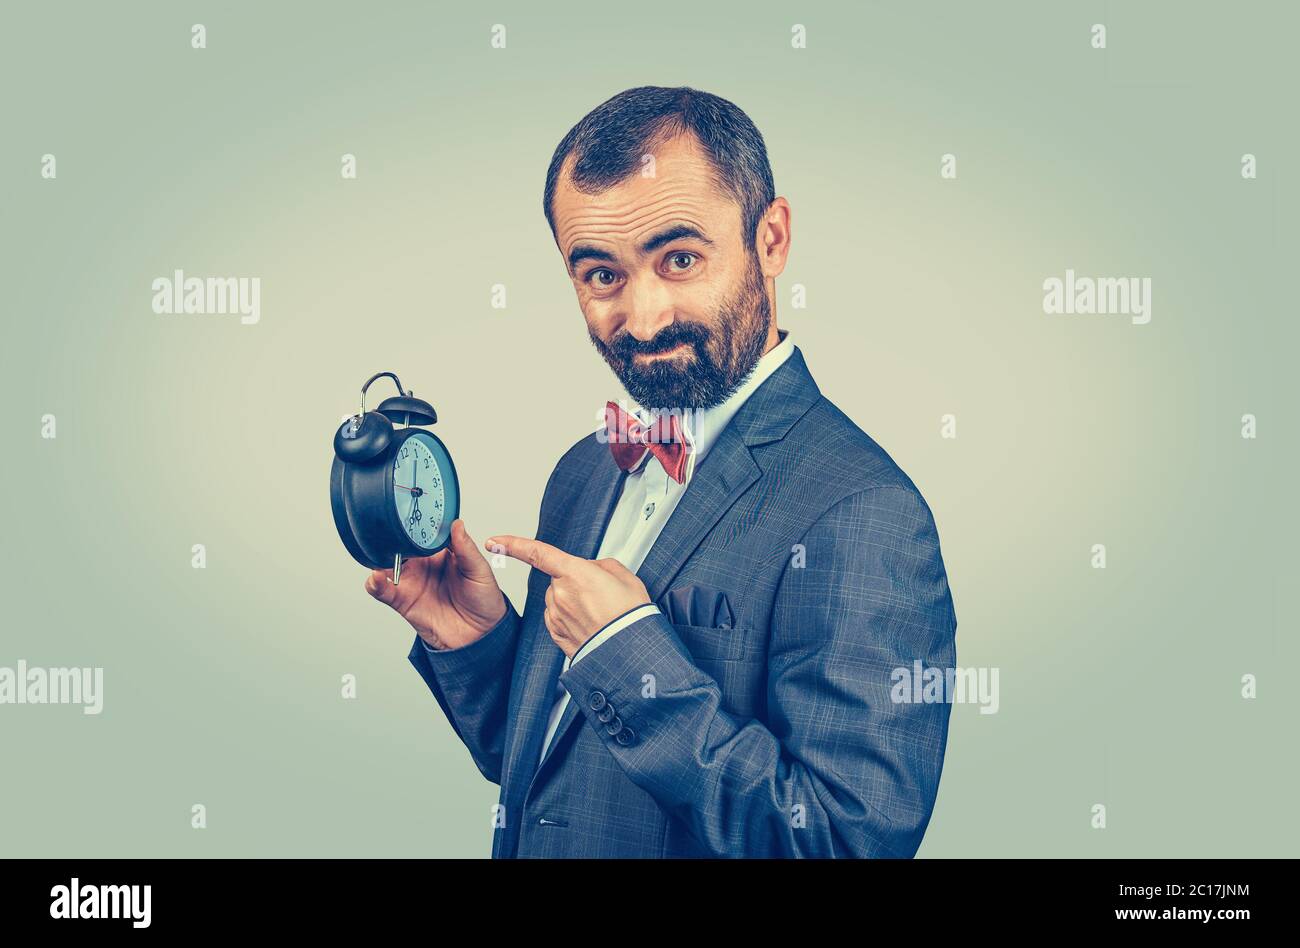 Mature man in suit showing an alarm clock. Businessman with an alarm clock in a hand looking at camera. Mixed race bearded model isolated on green yel Stock Photo